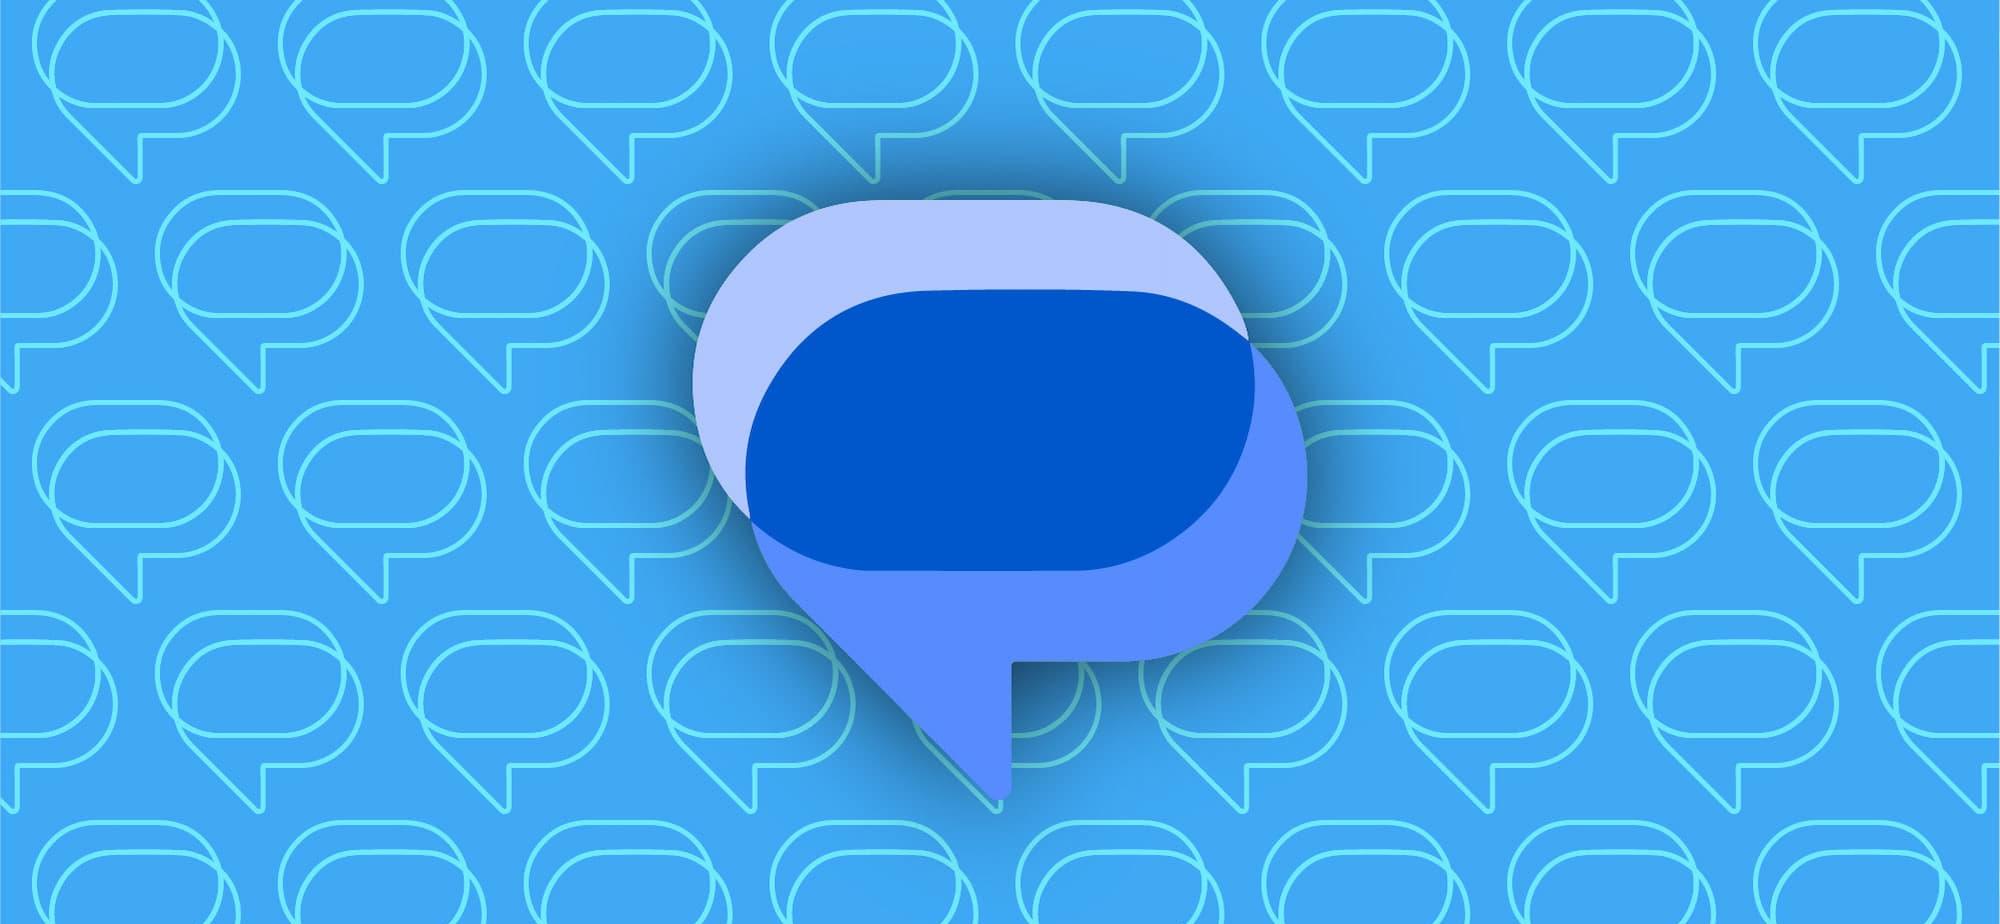 Google Messages Introduces Emoji Reaction Effects | Enhance Your Chats